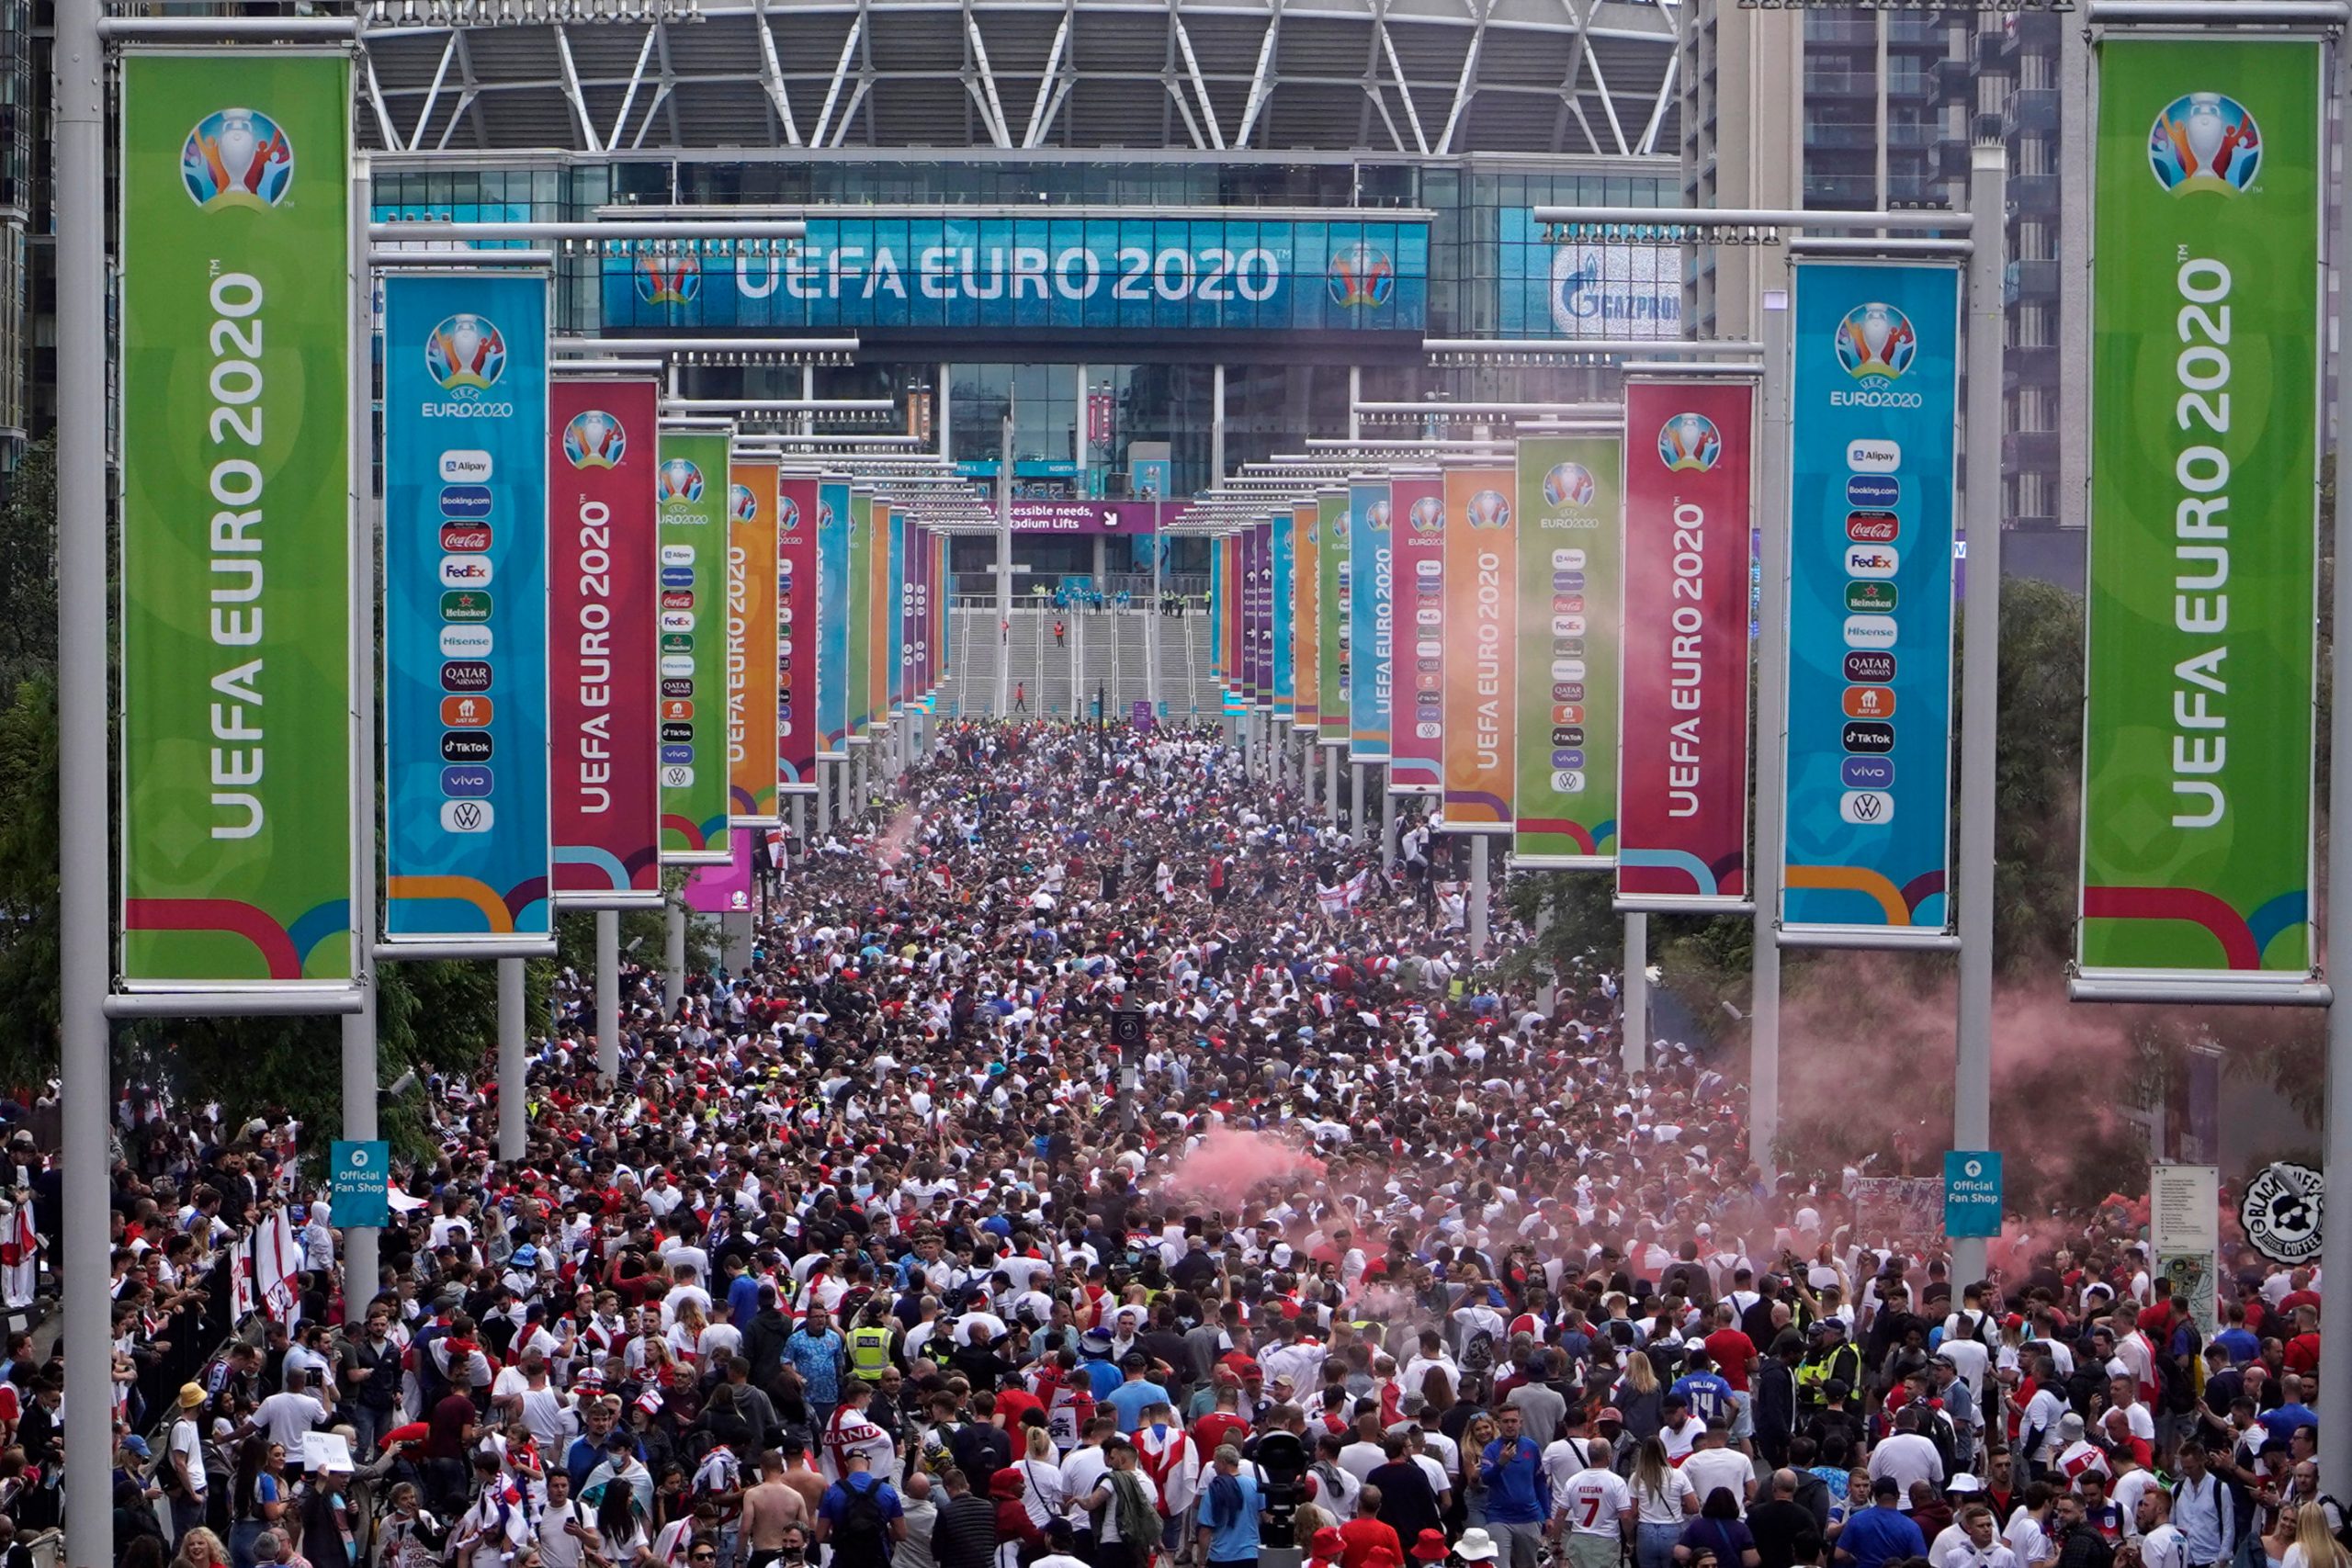 Ahead of Euro 2020 final, fan frenzy at Wembley and other parts of London